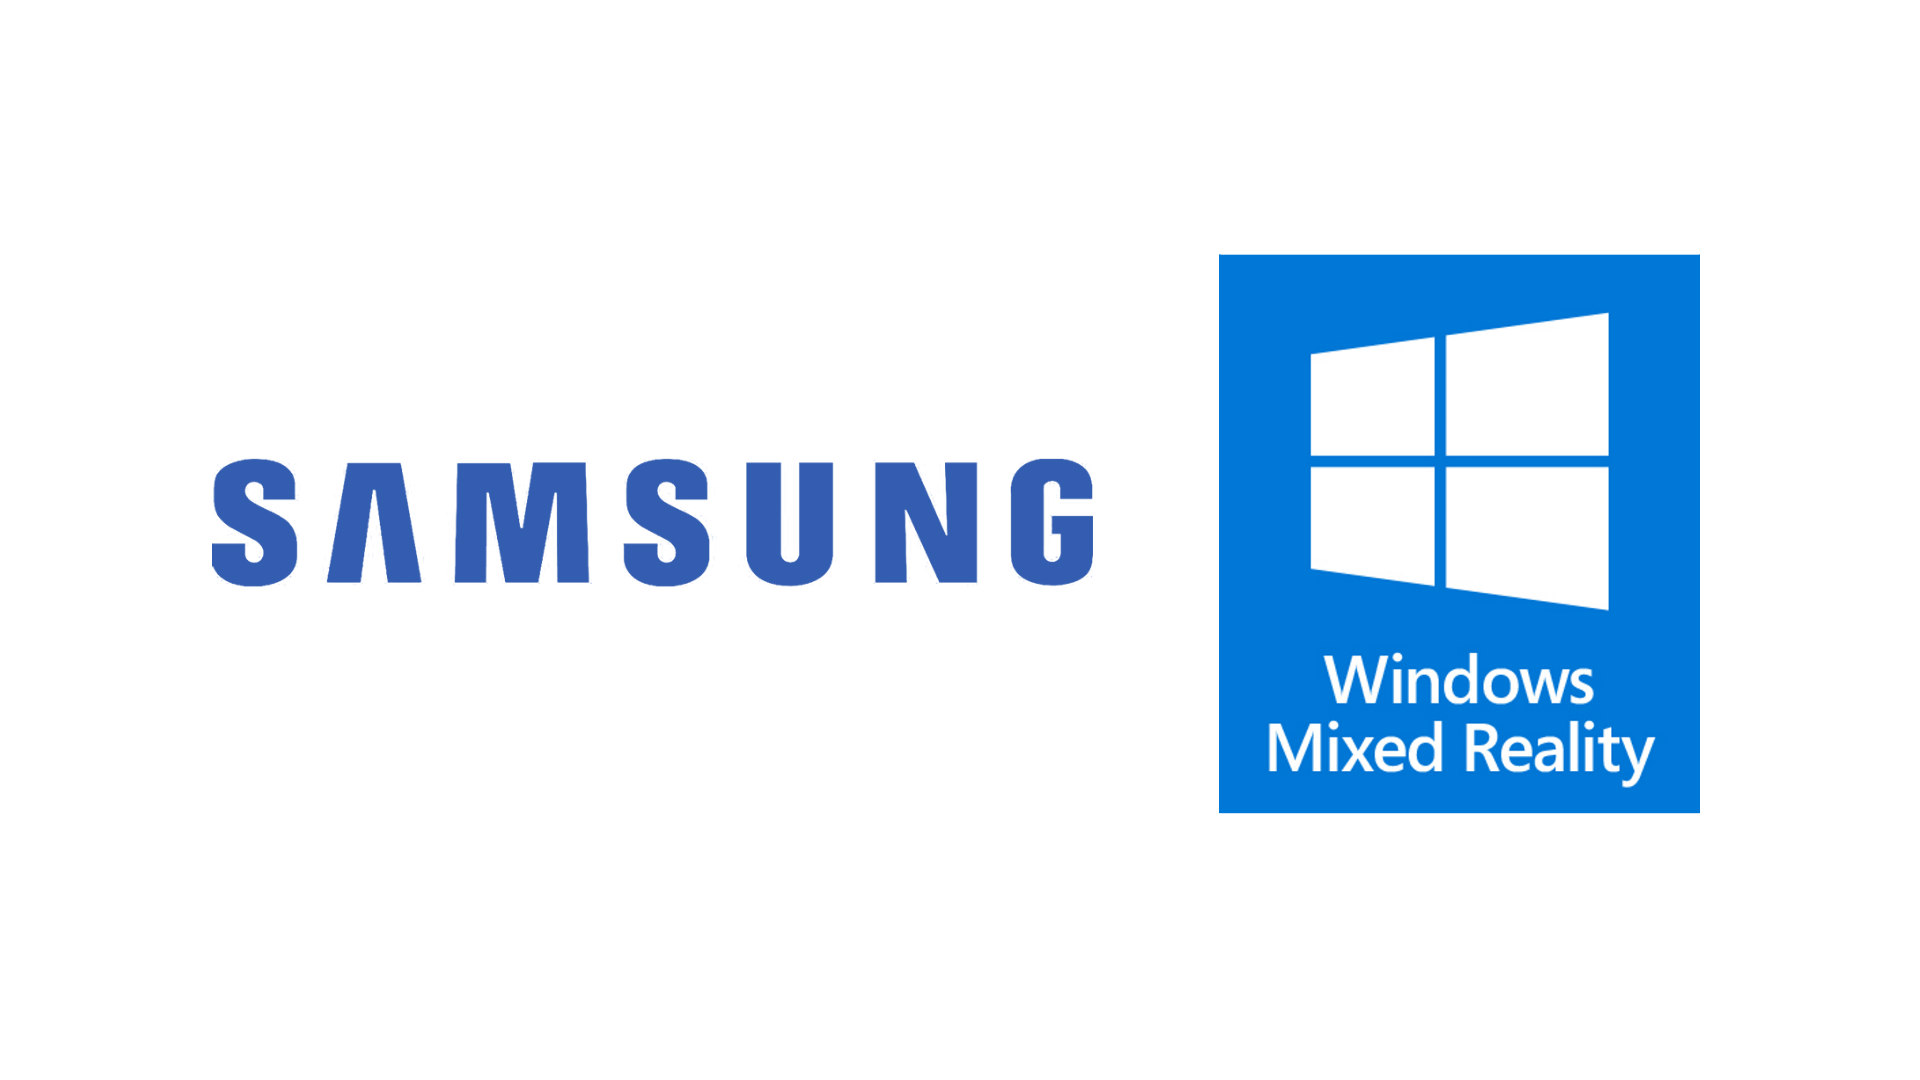 Bære Isolere umoral Report: Samsung & Microsoft Boost "MR" Partnership, Samsung Builds Wireless  AR/VR Headset – Road to VR